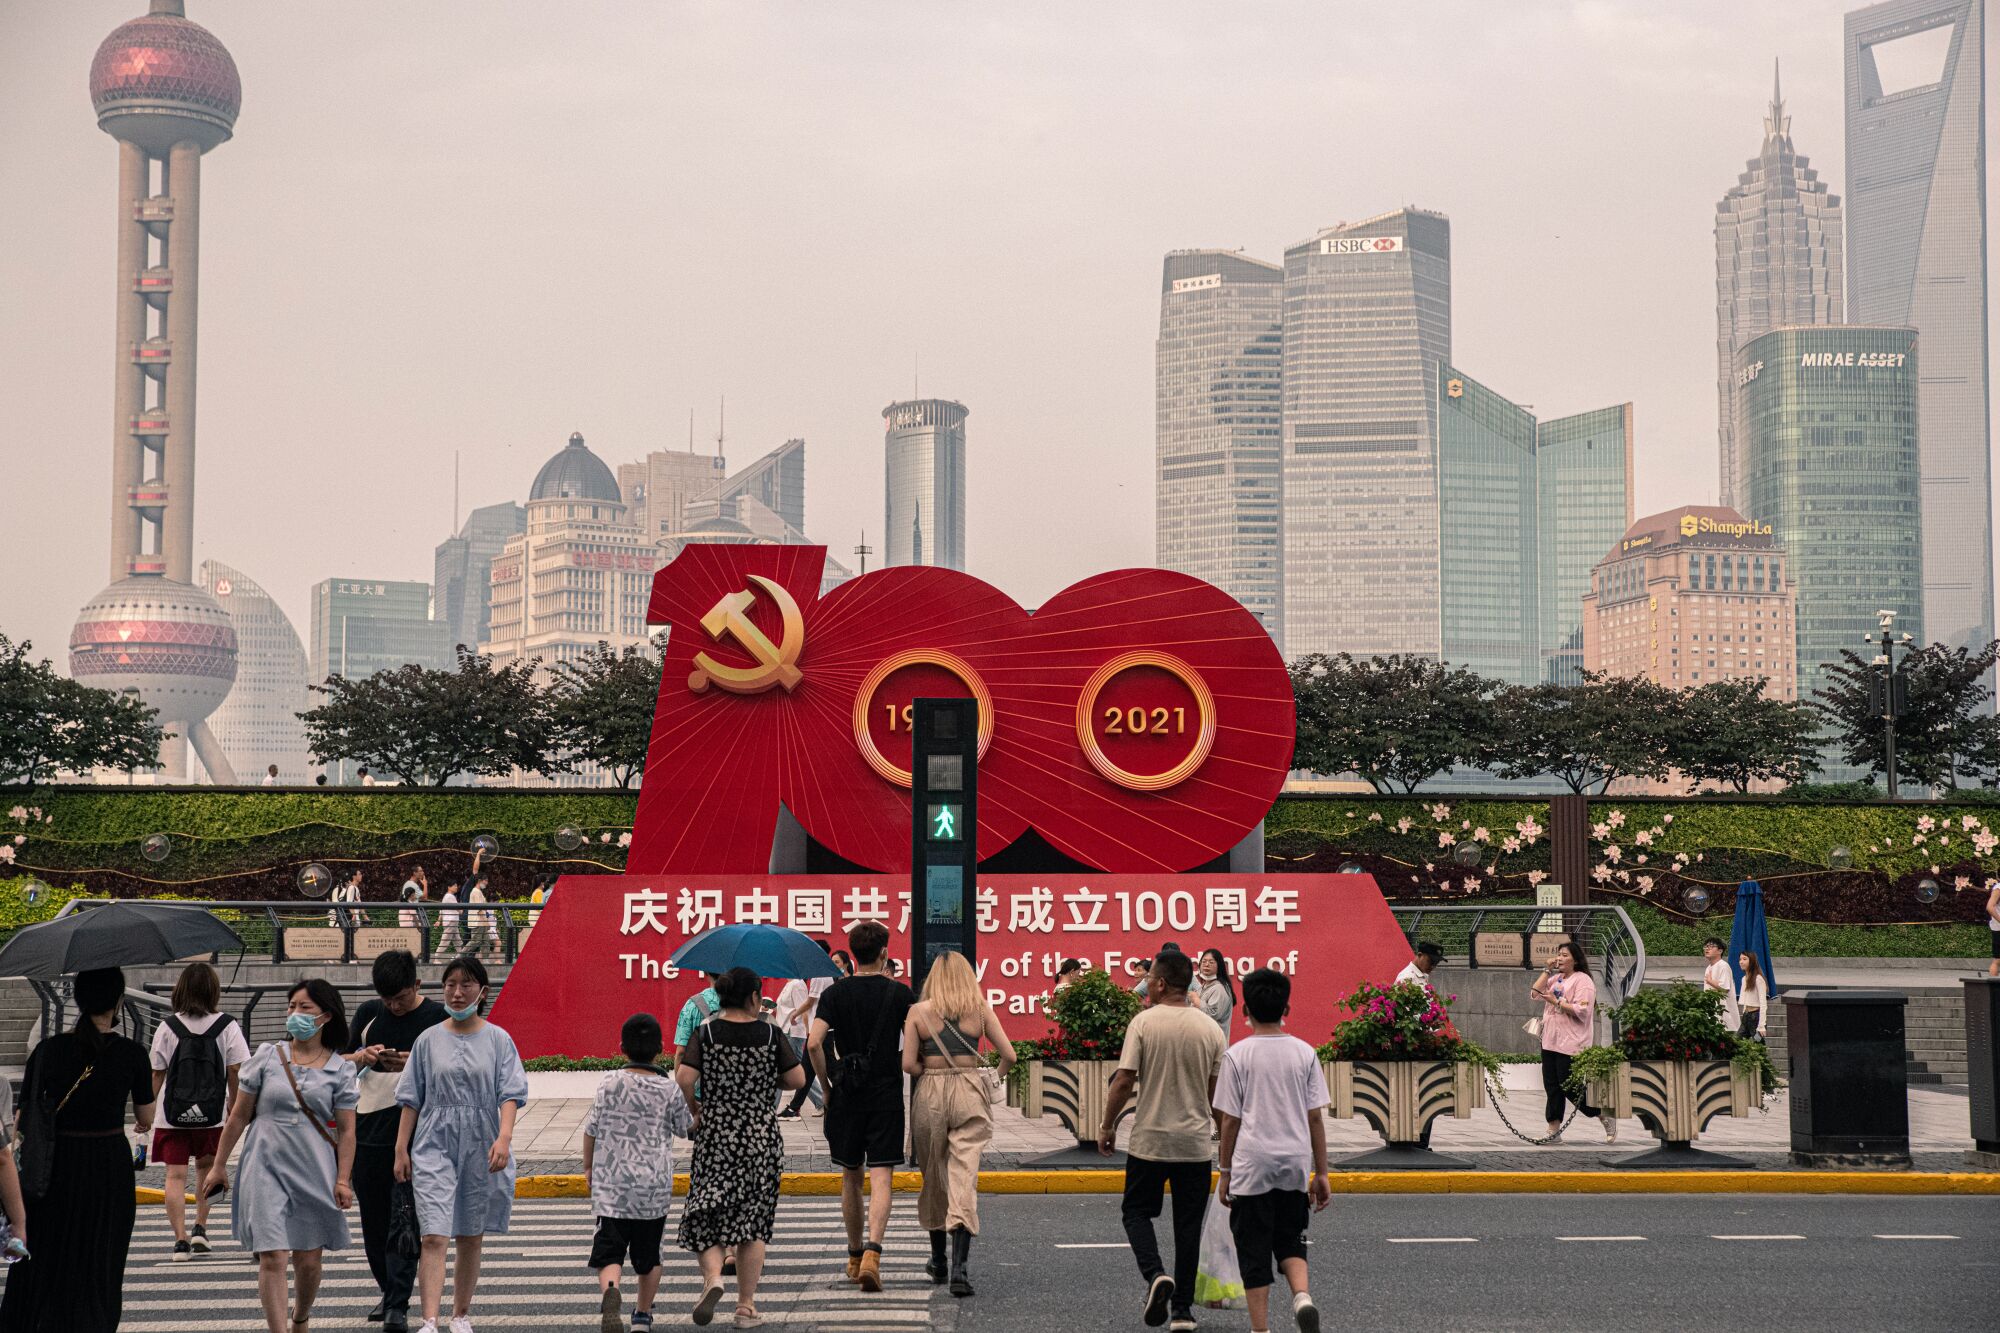 A sign in red depicting the number 100 and Chinese characters sits near a road with pedestrians